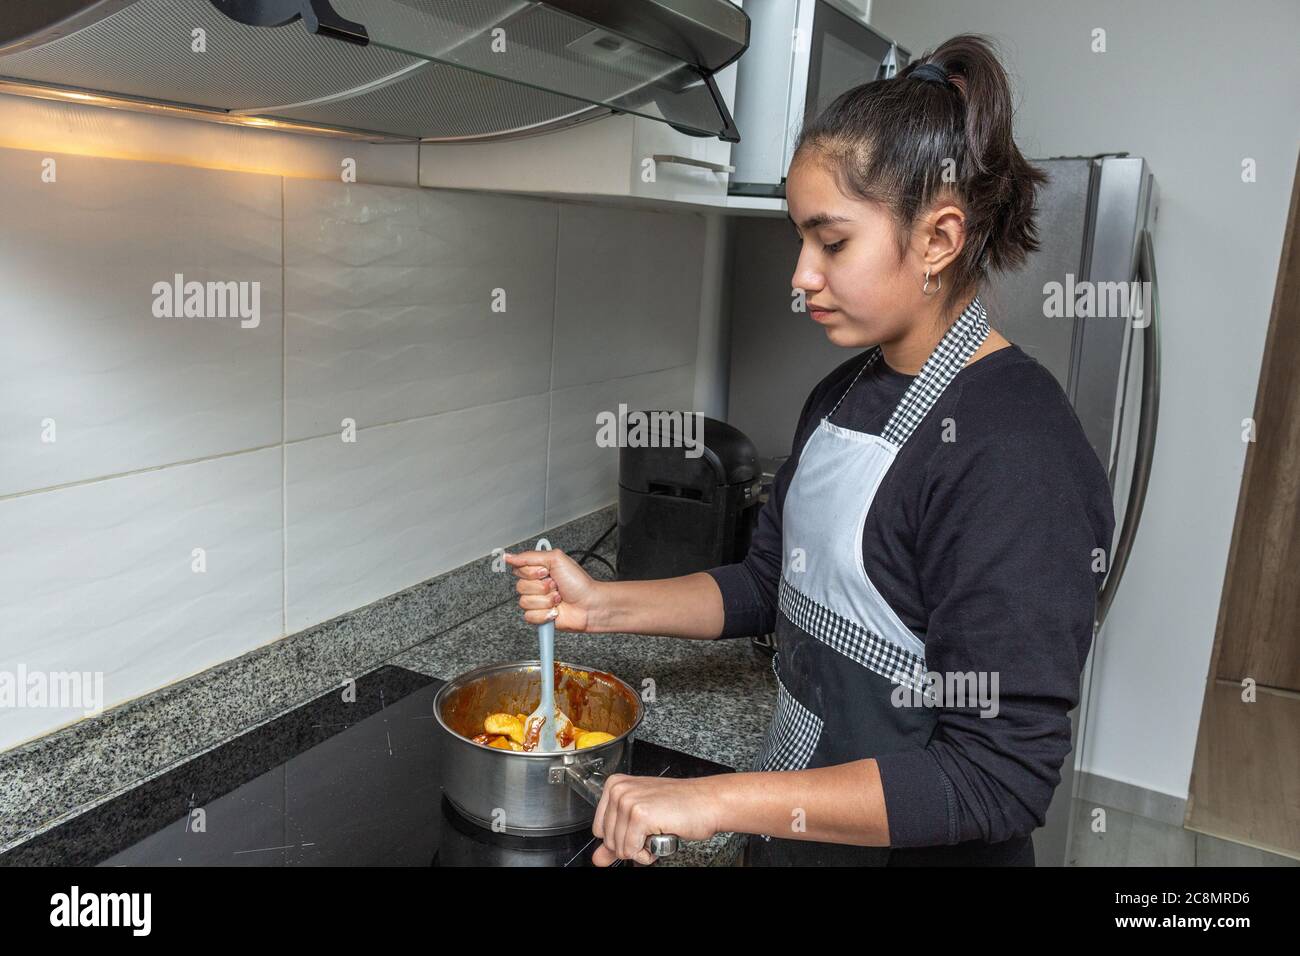 Teenage girl cooking apples with caramel to make a cake in her kitchen Stock Photo